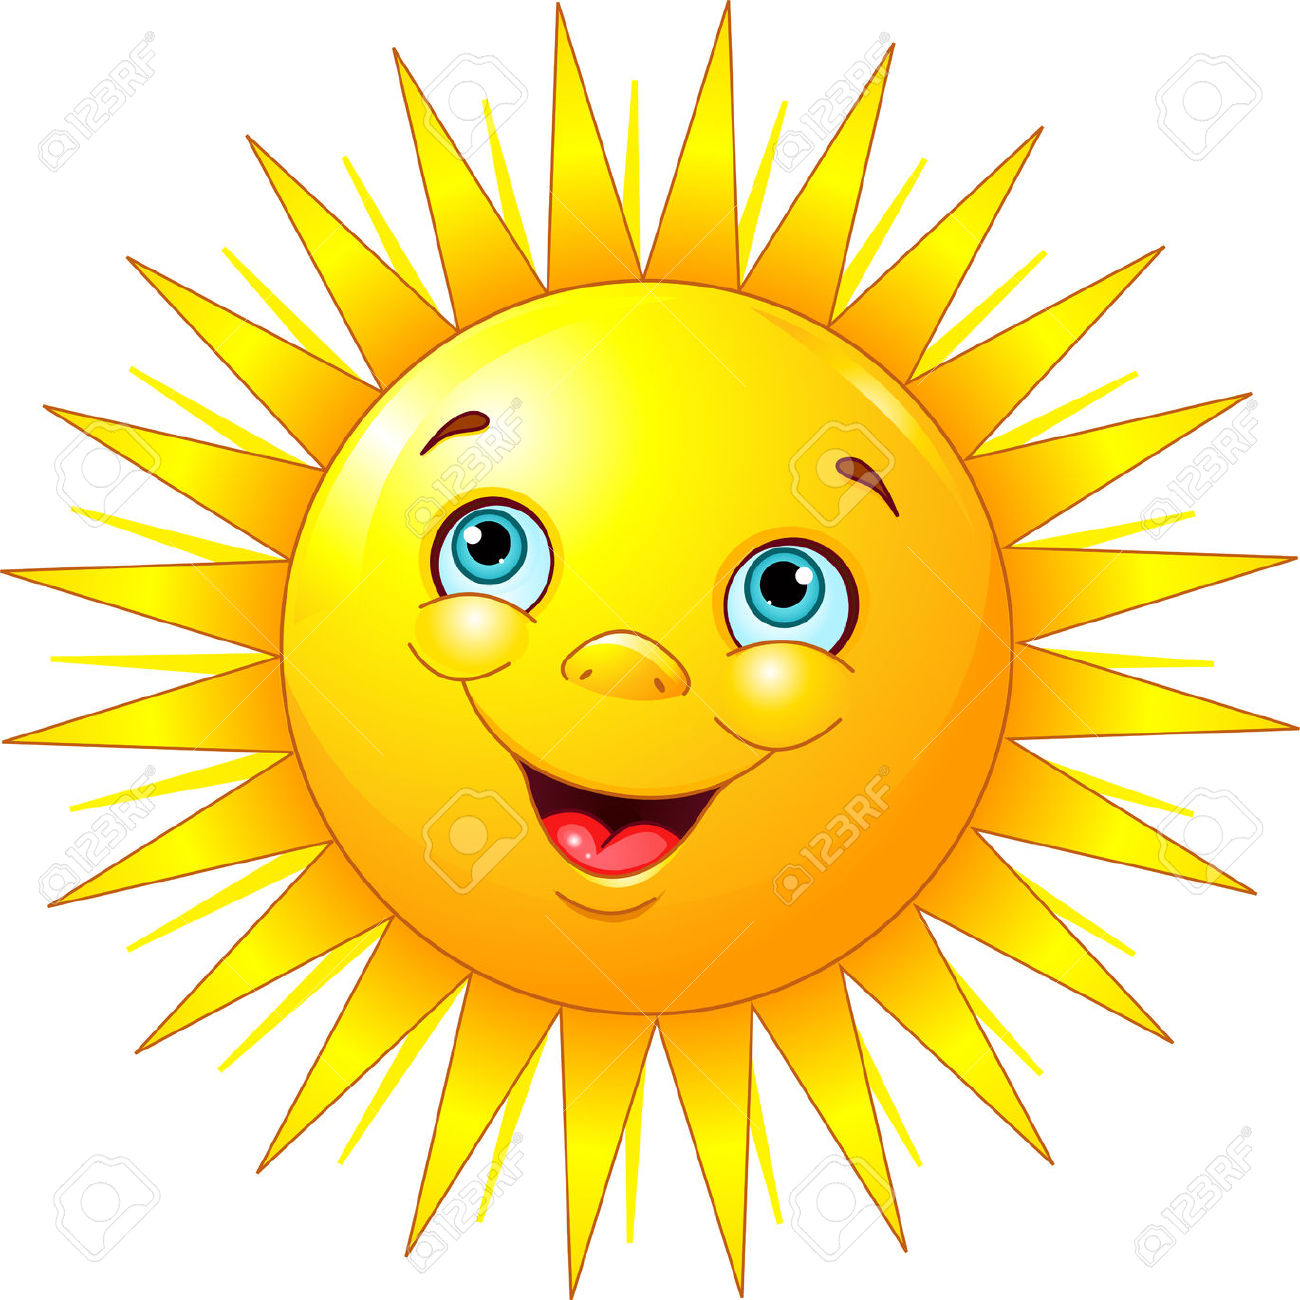 good weather clipart - photo #33